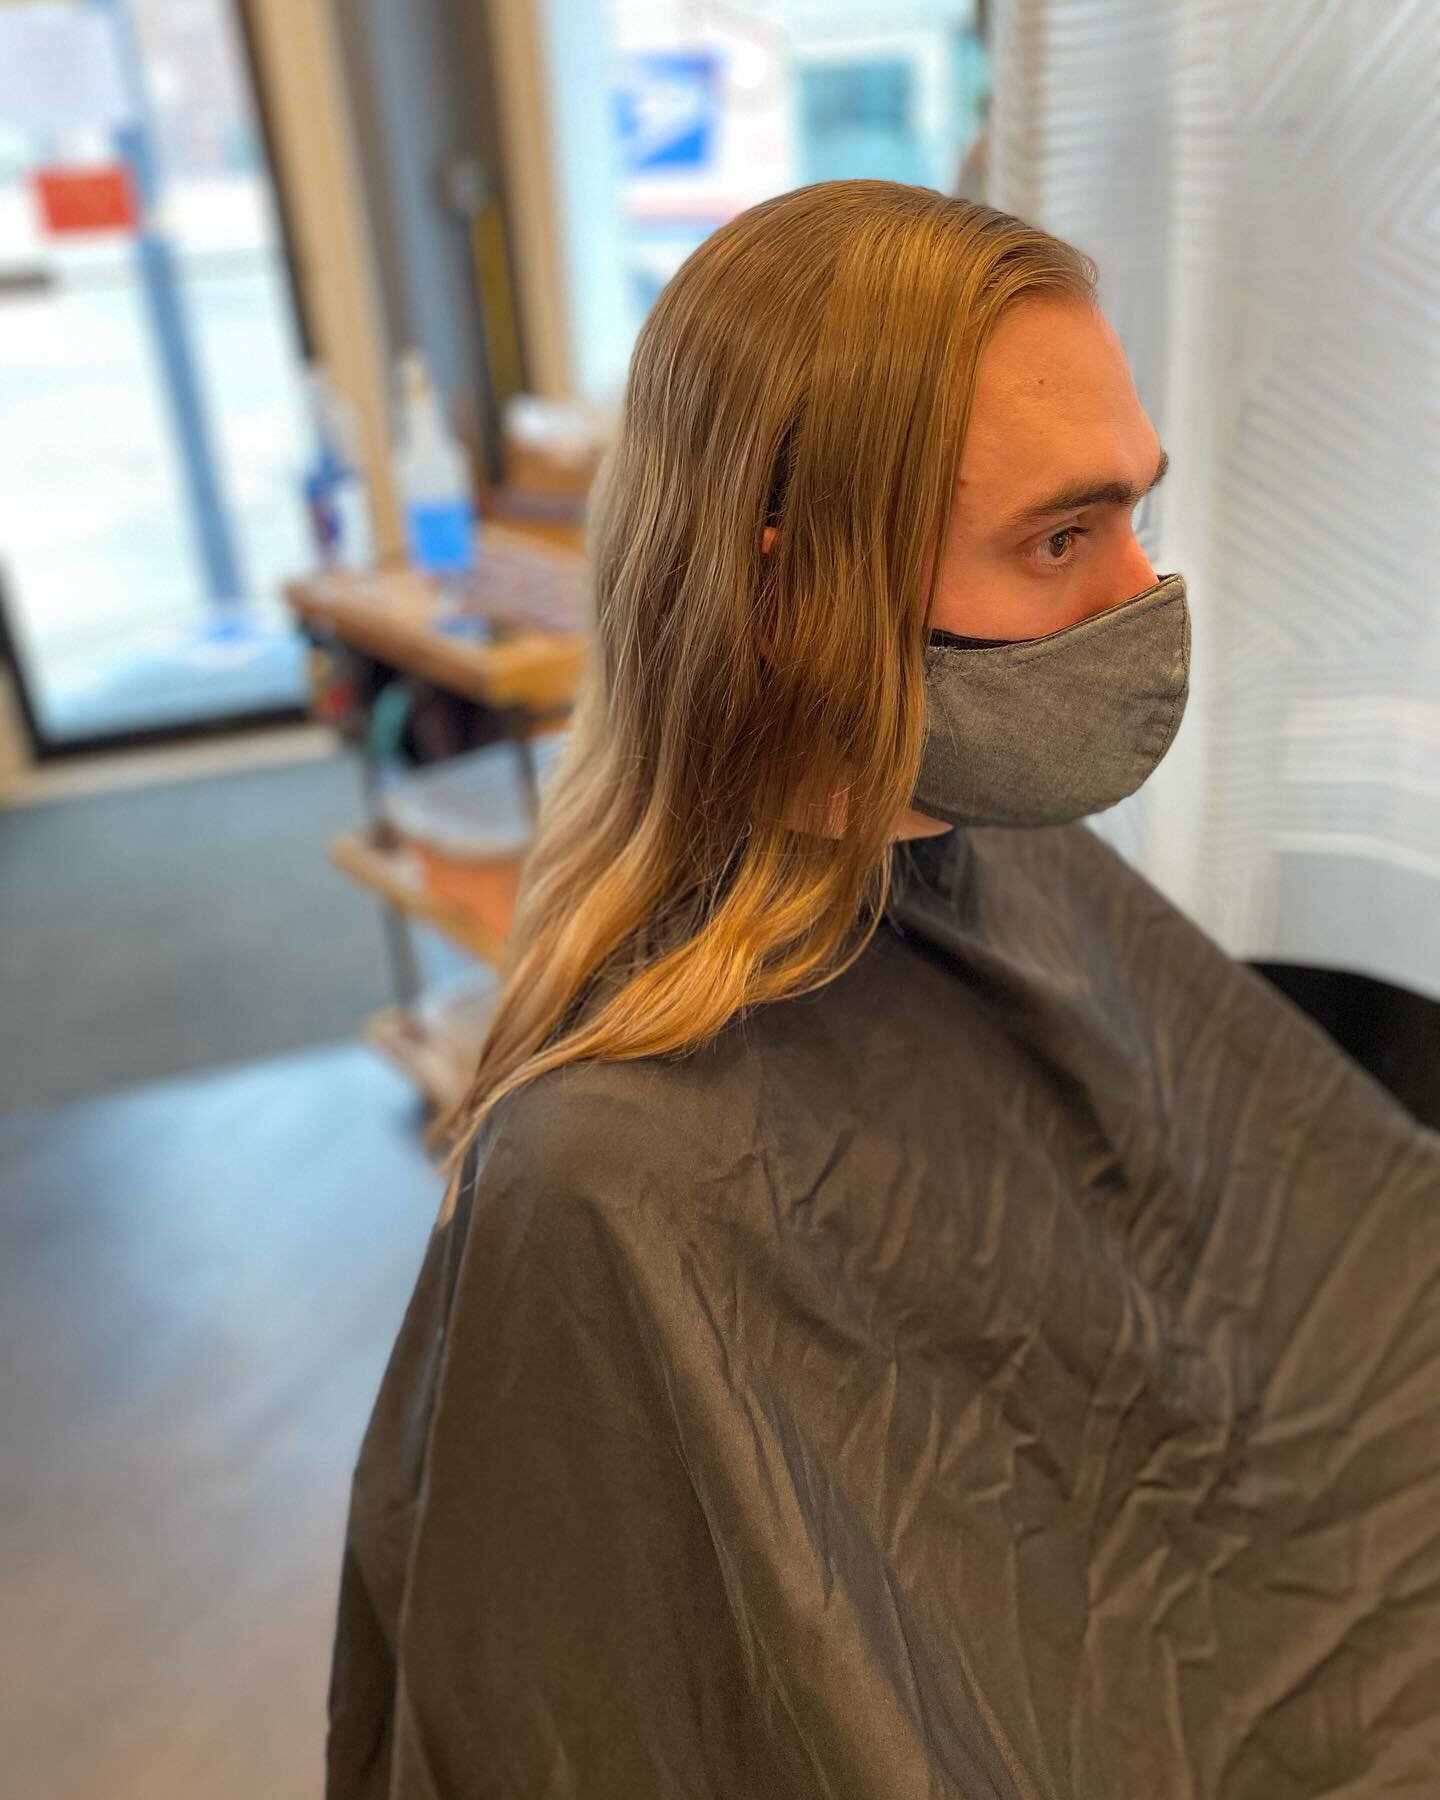 Sick of your long locks dragging you down?(even if they are beautiful) Im here to help you make the change you&rsquo;re looking for! 
🐌
🐌
🐌
Don&rsquo;t worry! He didn&rsquo;t let that long beautiful hair go to waste! He took it with him to find a 